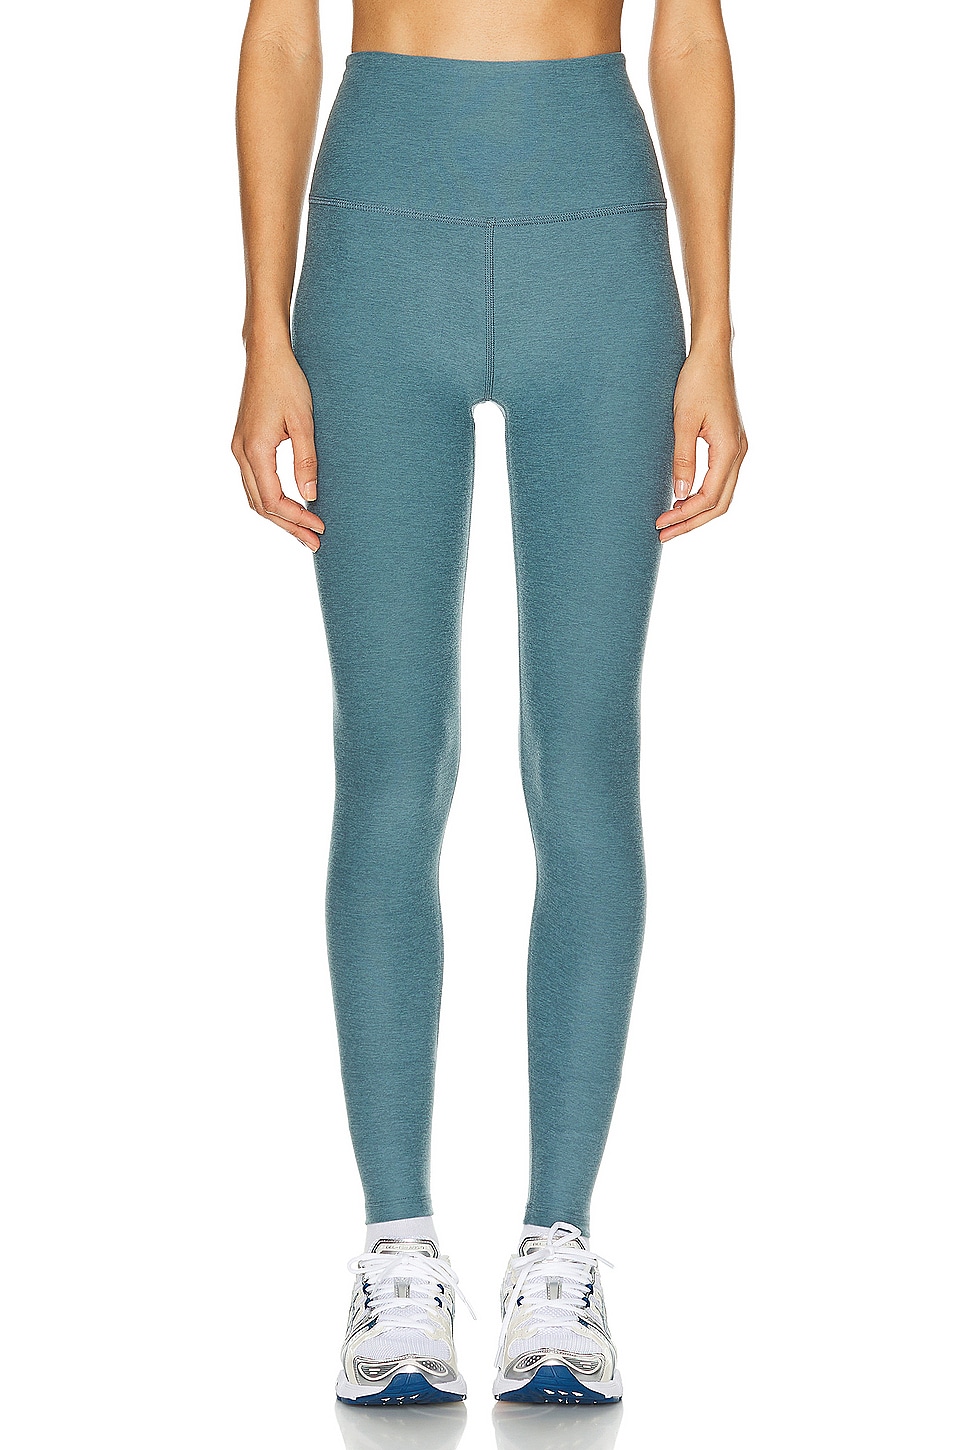 Image 1 of Beyond Yoga Spacedye Caught In The Midi High Waisted Legging in Storm Heather